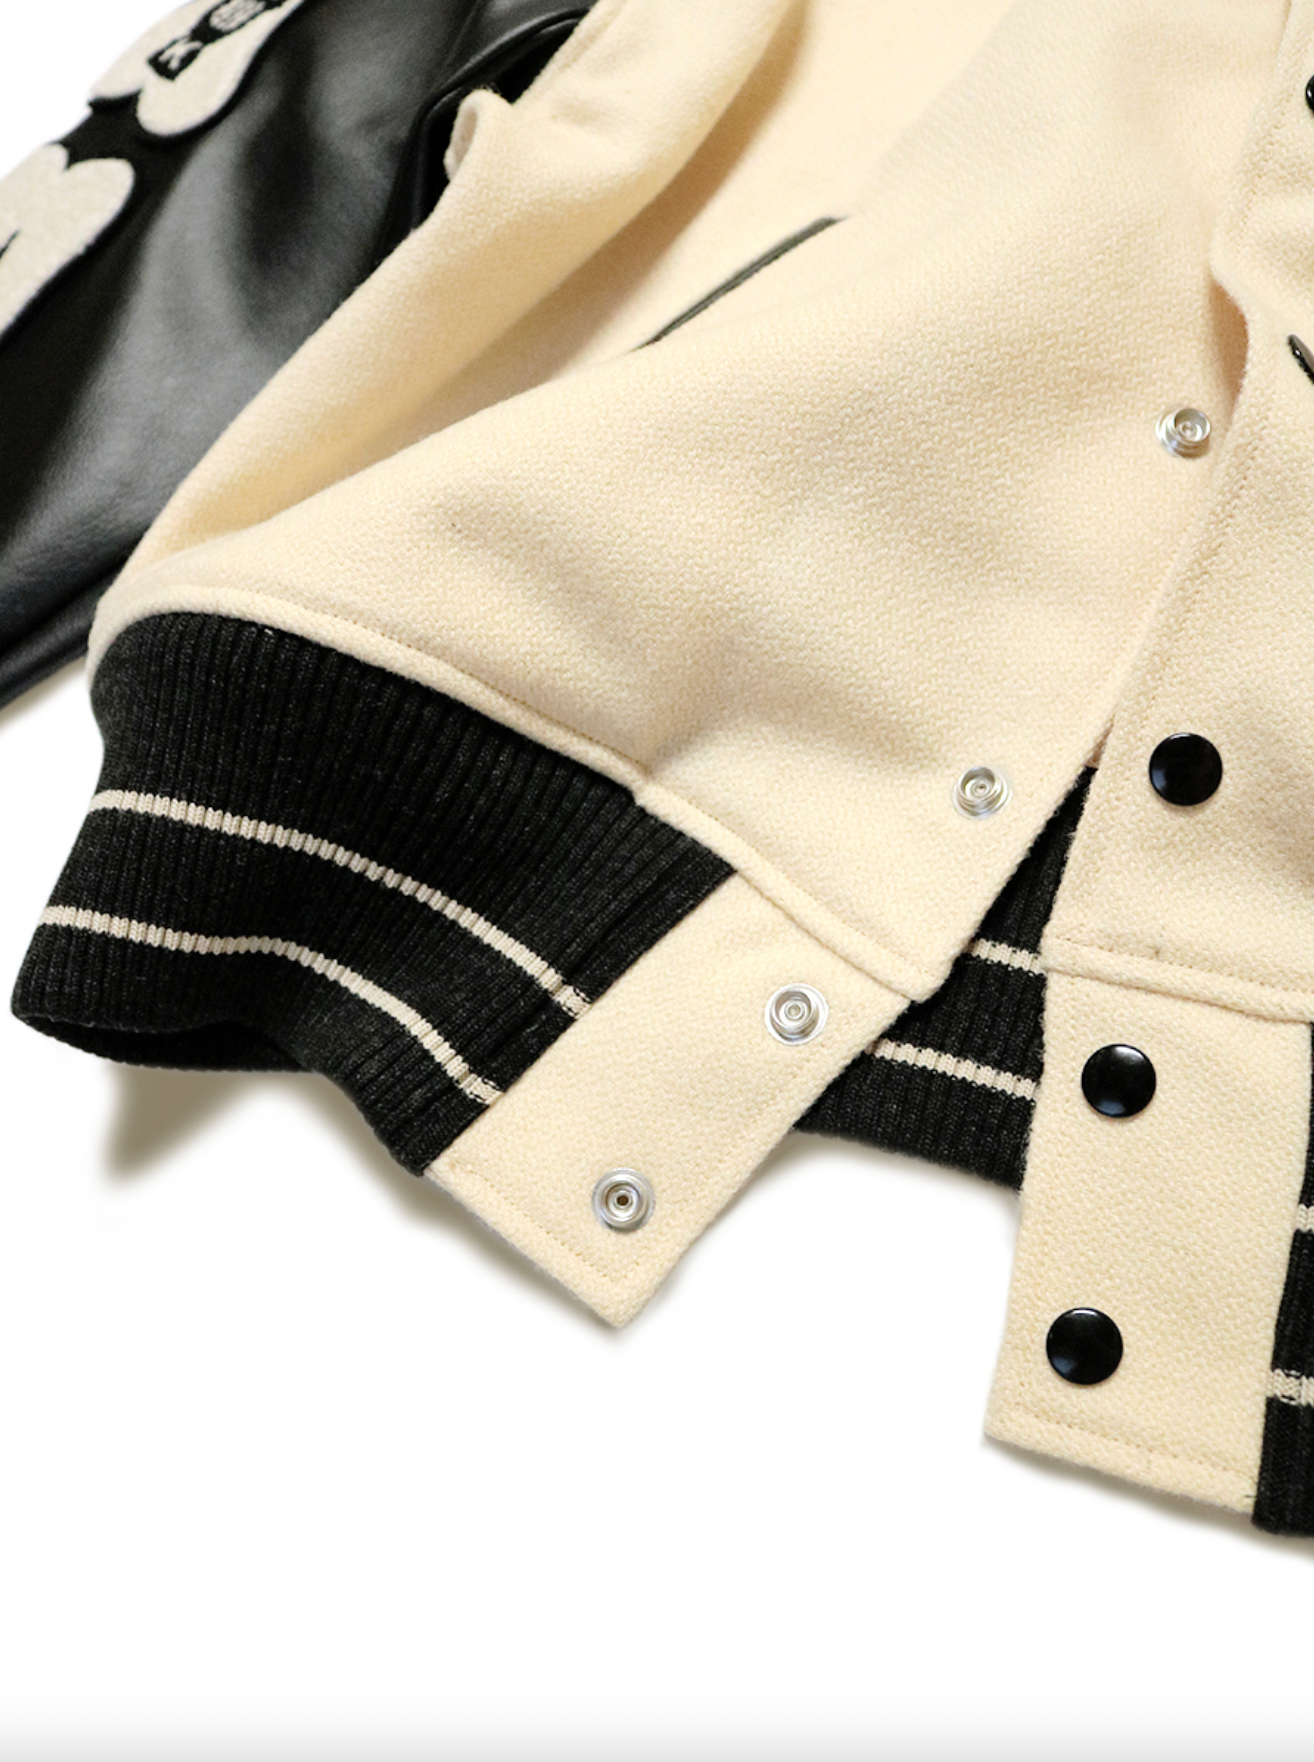 FAUX LEATHER AND WOOL-BLEND VARSITY JACKET - CREAMY WHITE